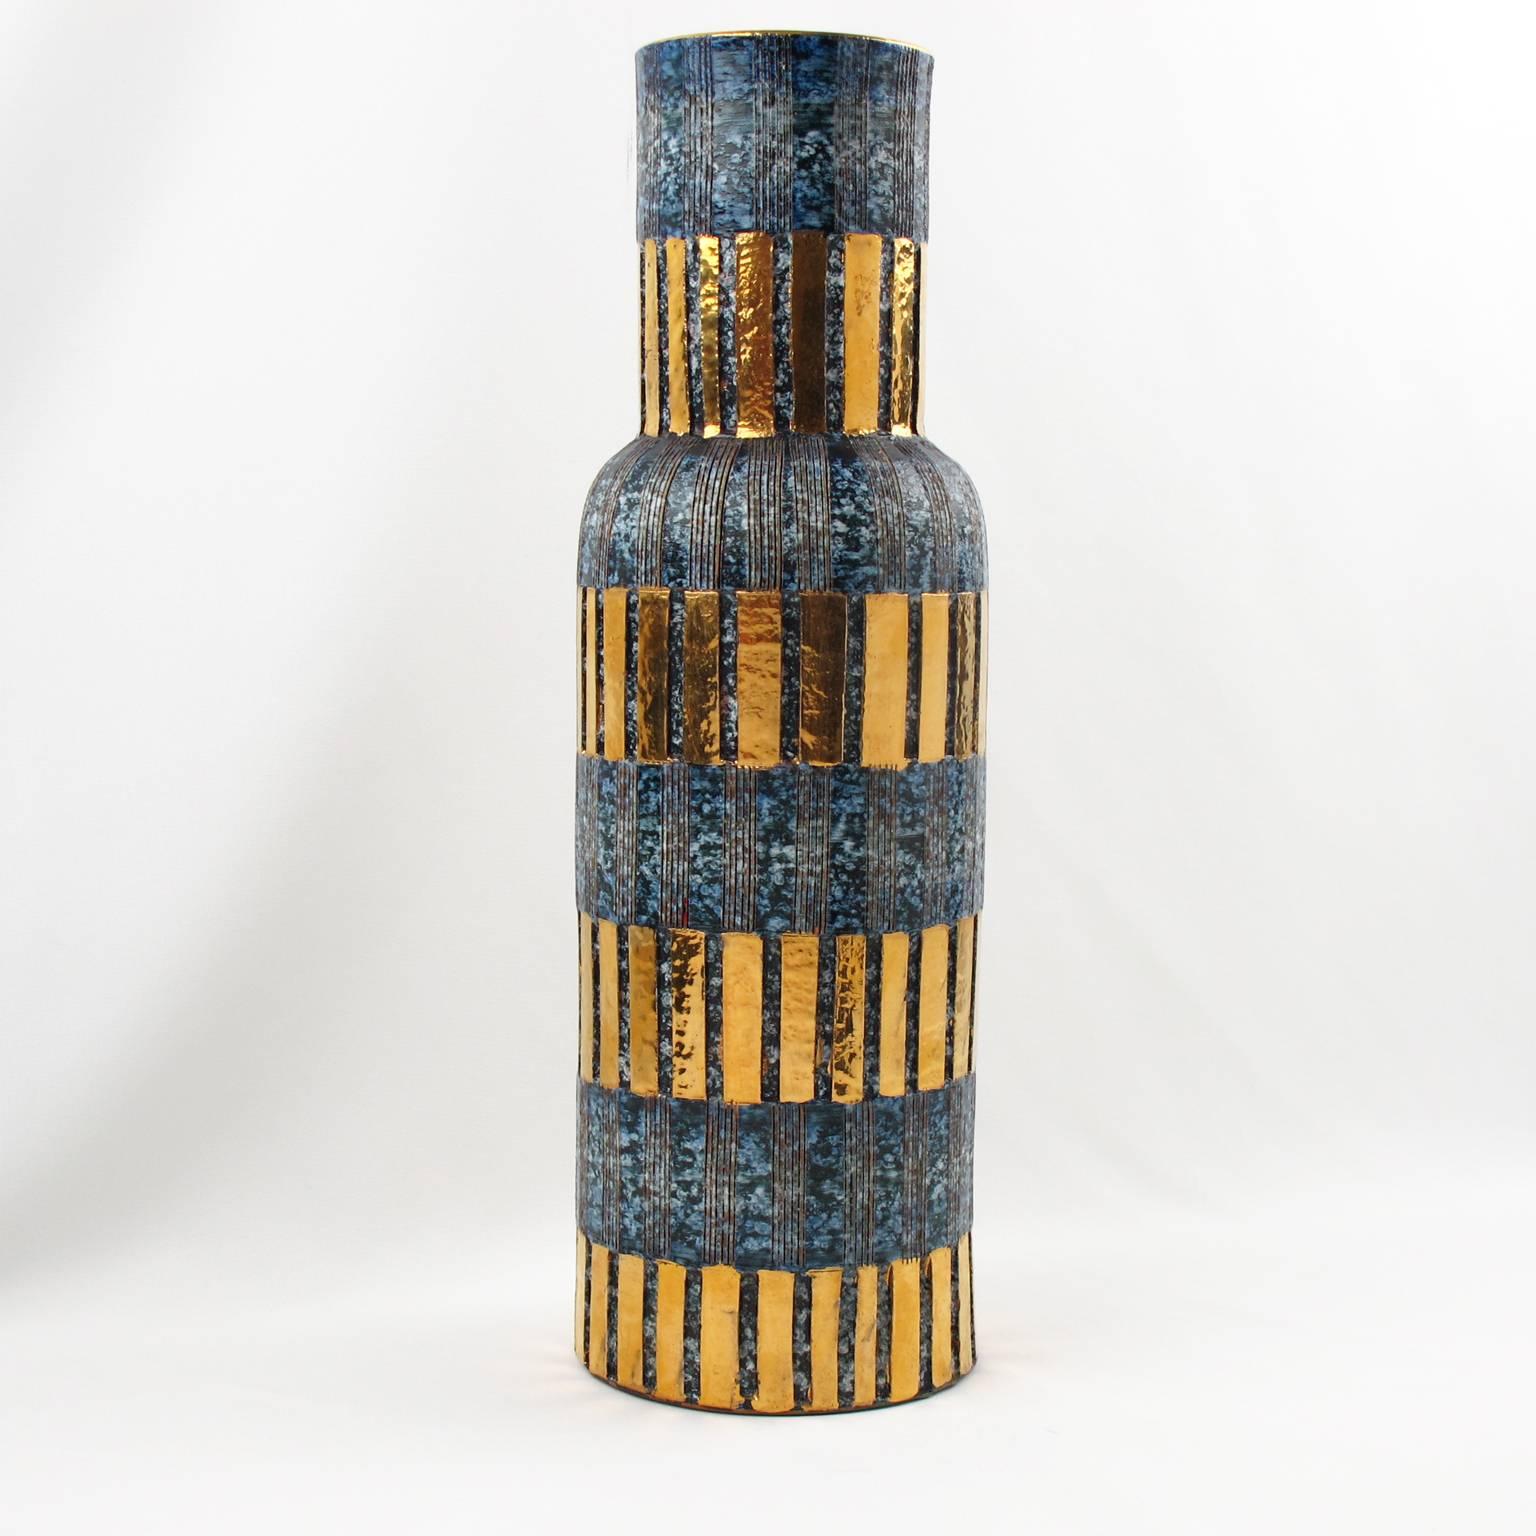 Mid-Century Modern vintage Aldo Londi for Bitossi ceramic seta vase, Italy, circa 1960s. Chunky tall vase with sgraffito sections combined with pattern from the seta collection. Black and blue marble colors and gold glazed bands. Tall tumbler shape